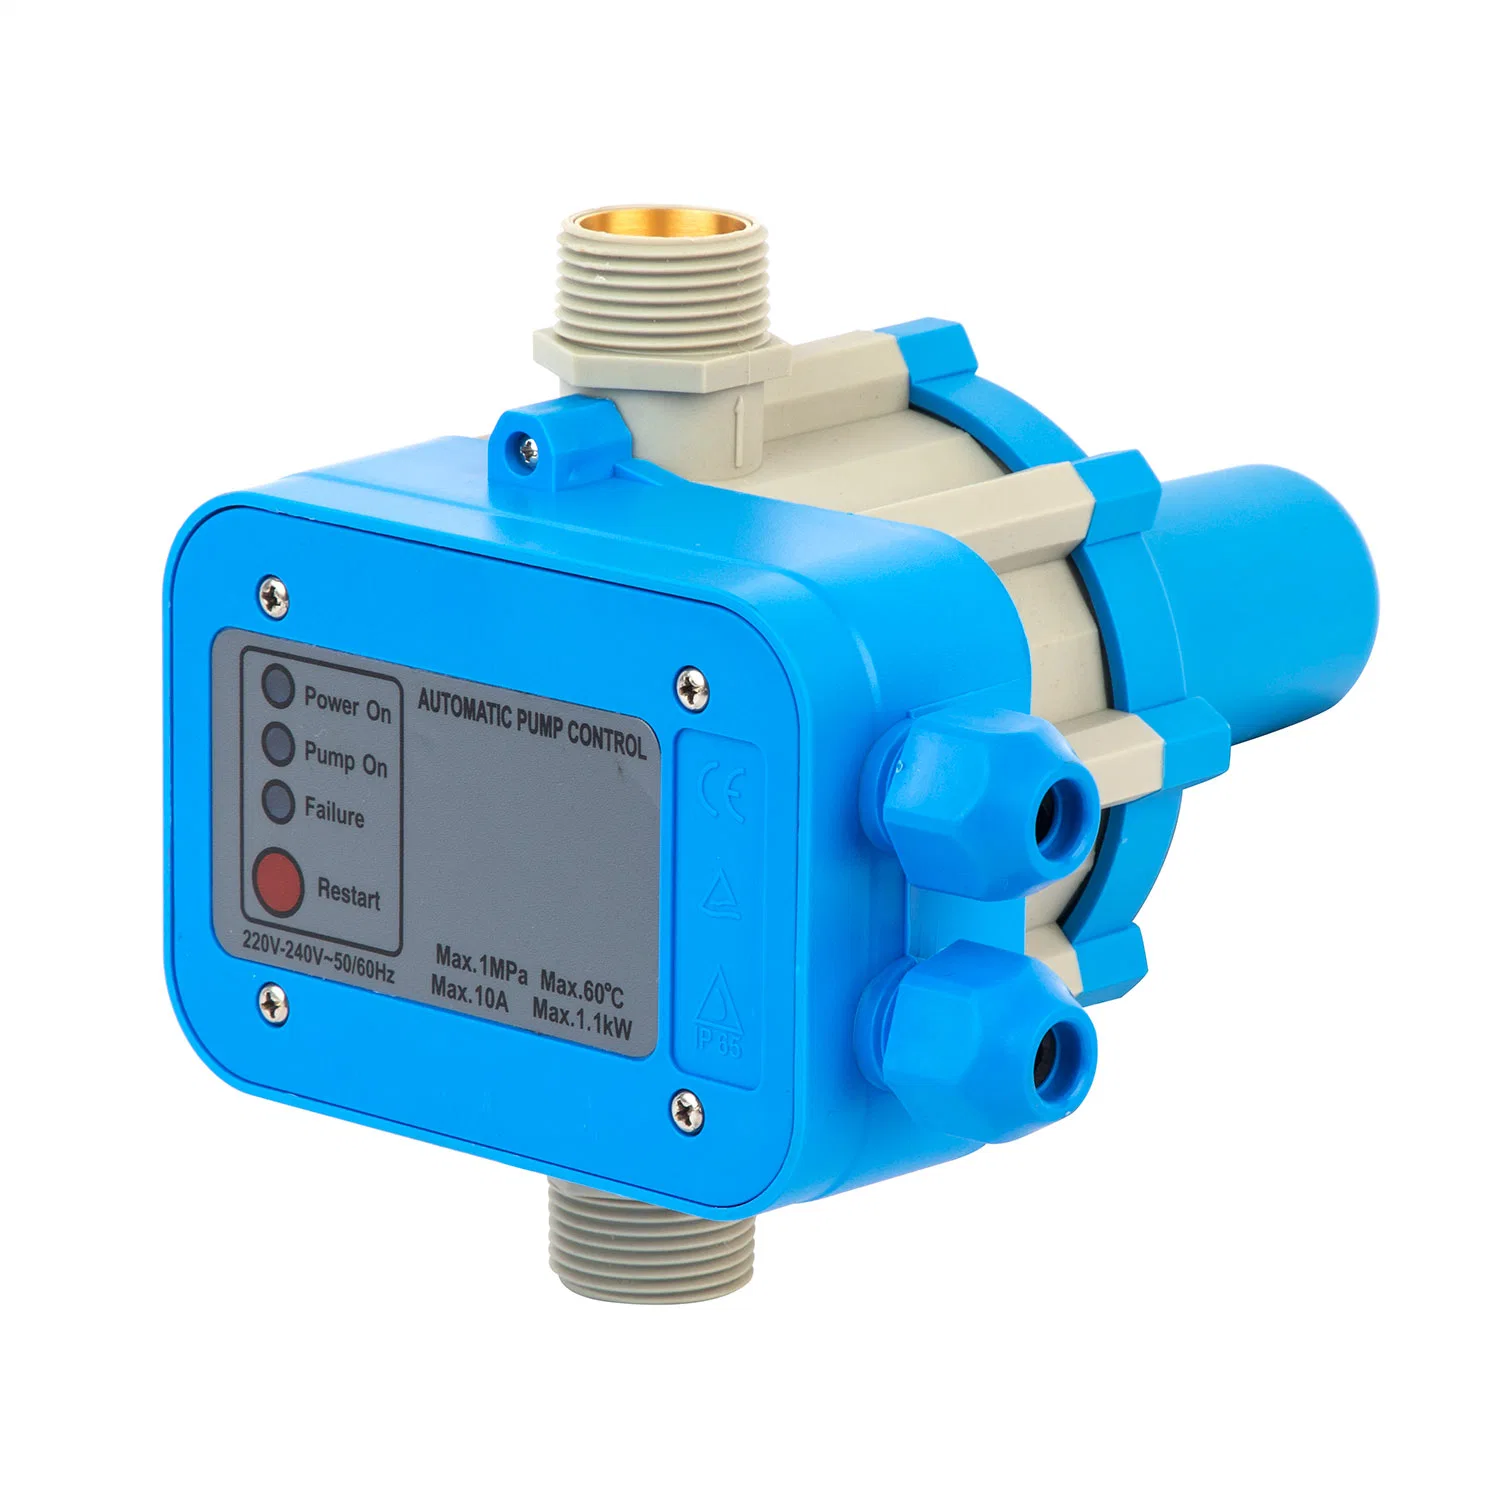 Hot Selling Automatic Water Pump Pressure Press Control Switch 1.1kw /1.5kw